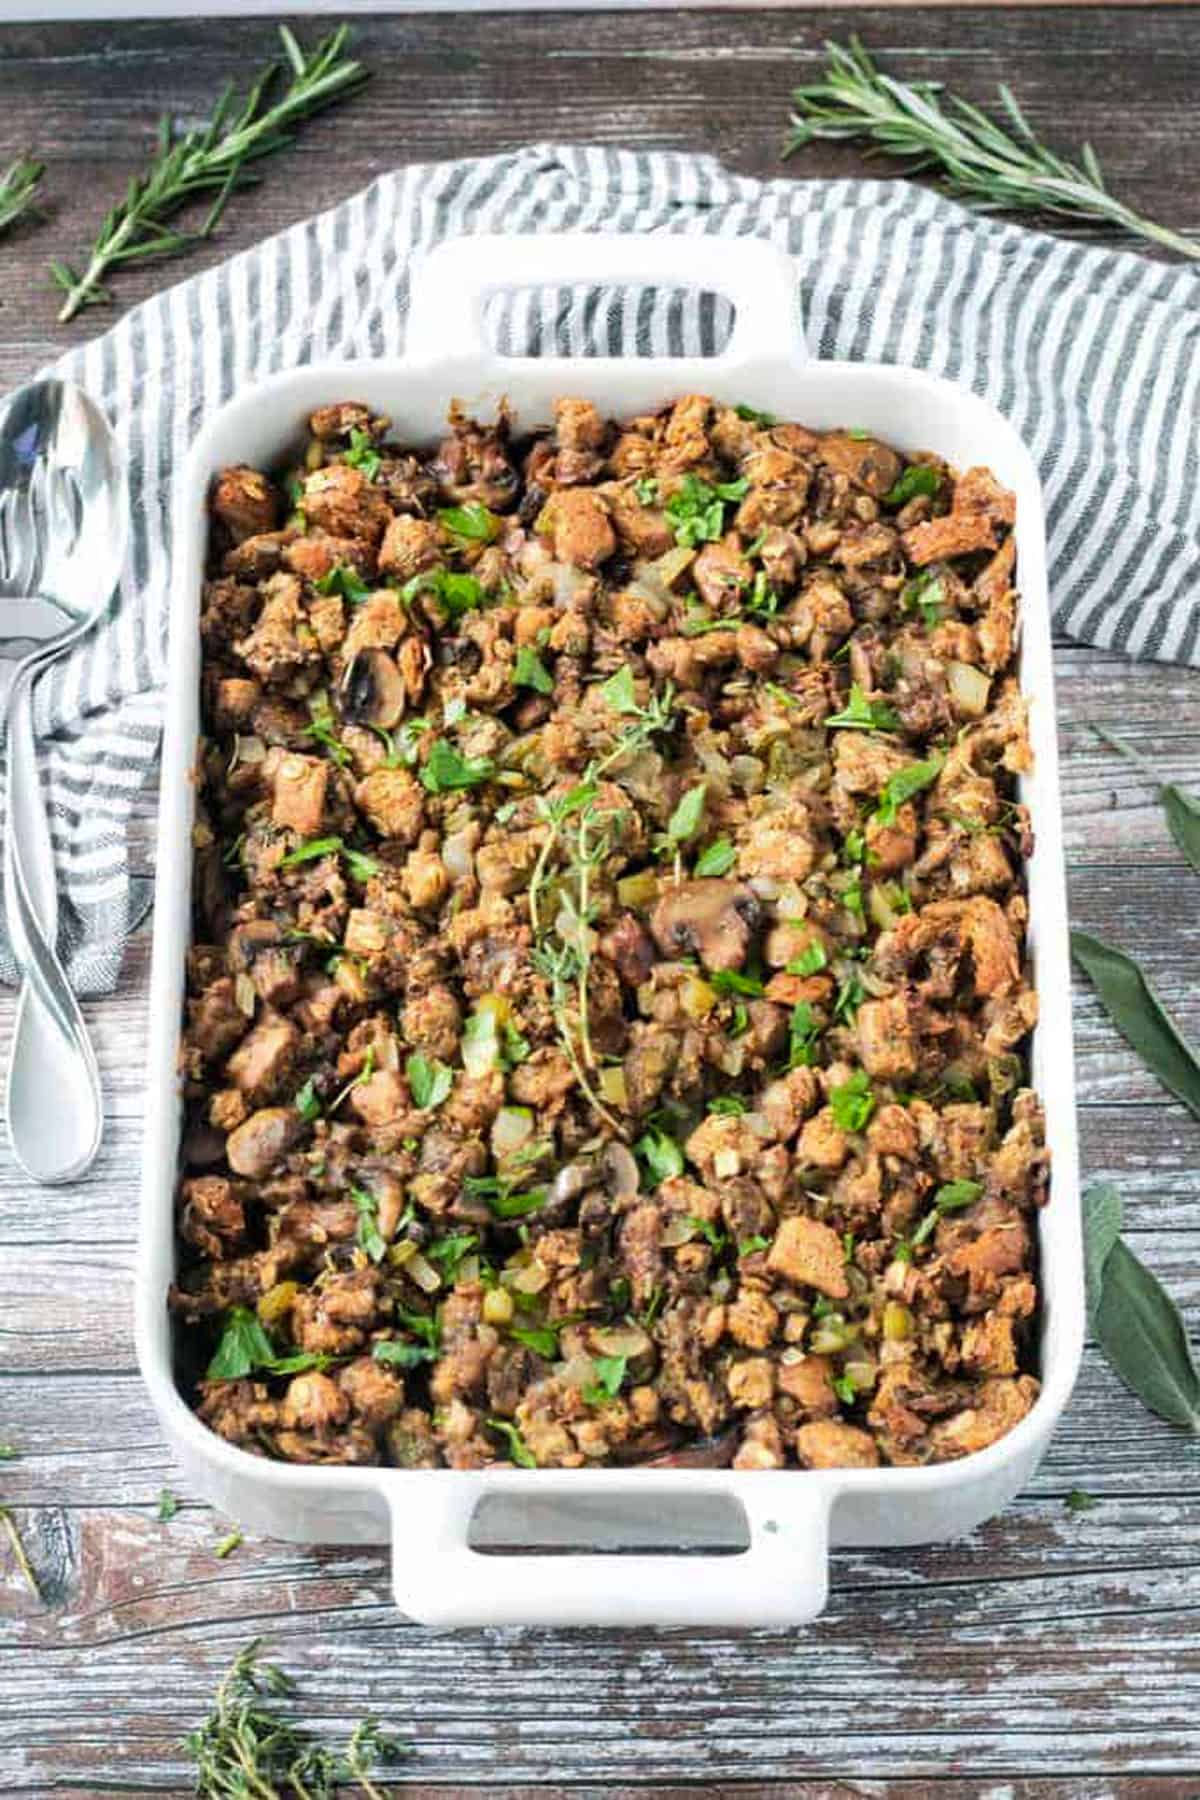 Finished dish of vegan stuffing with mushrooms in a white baking dish.